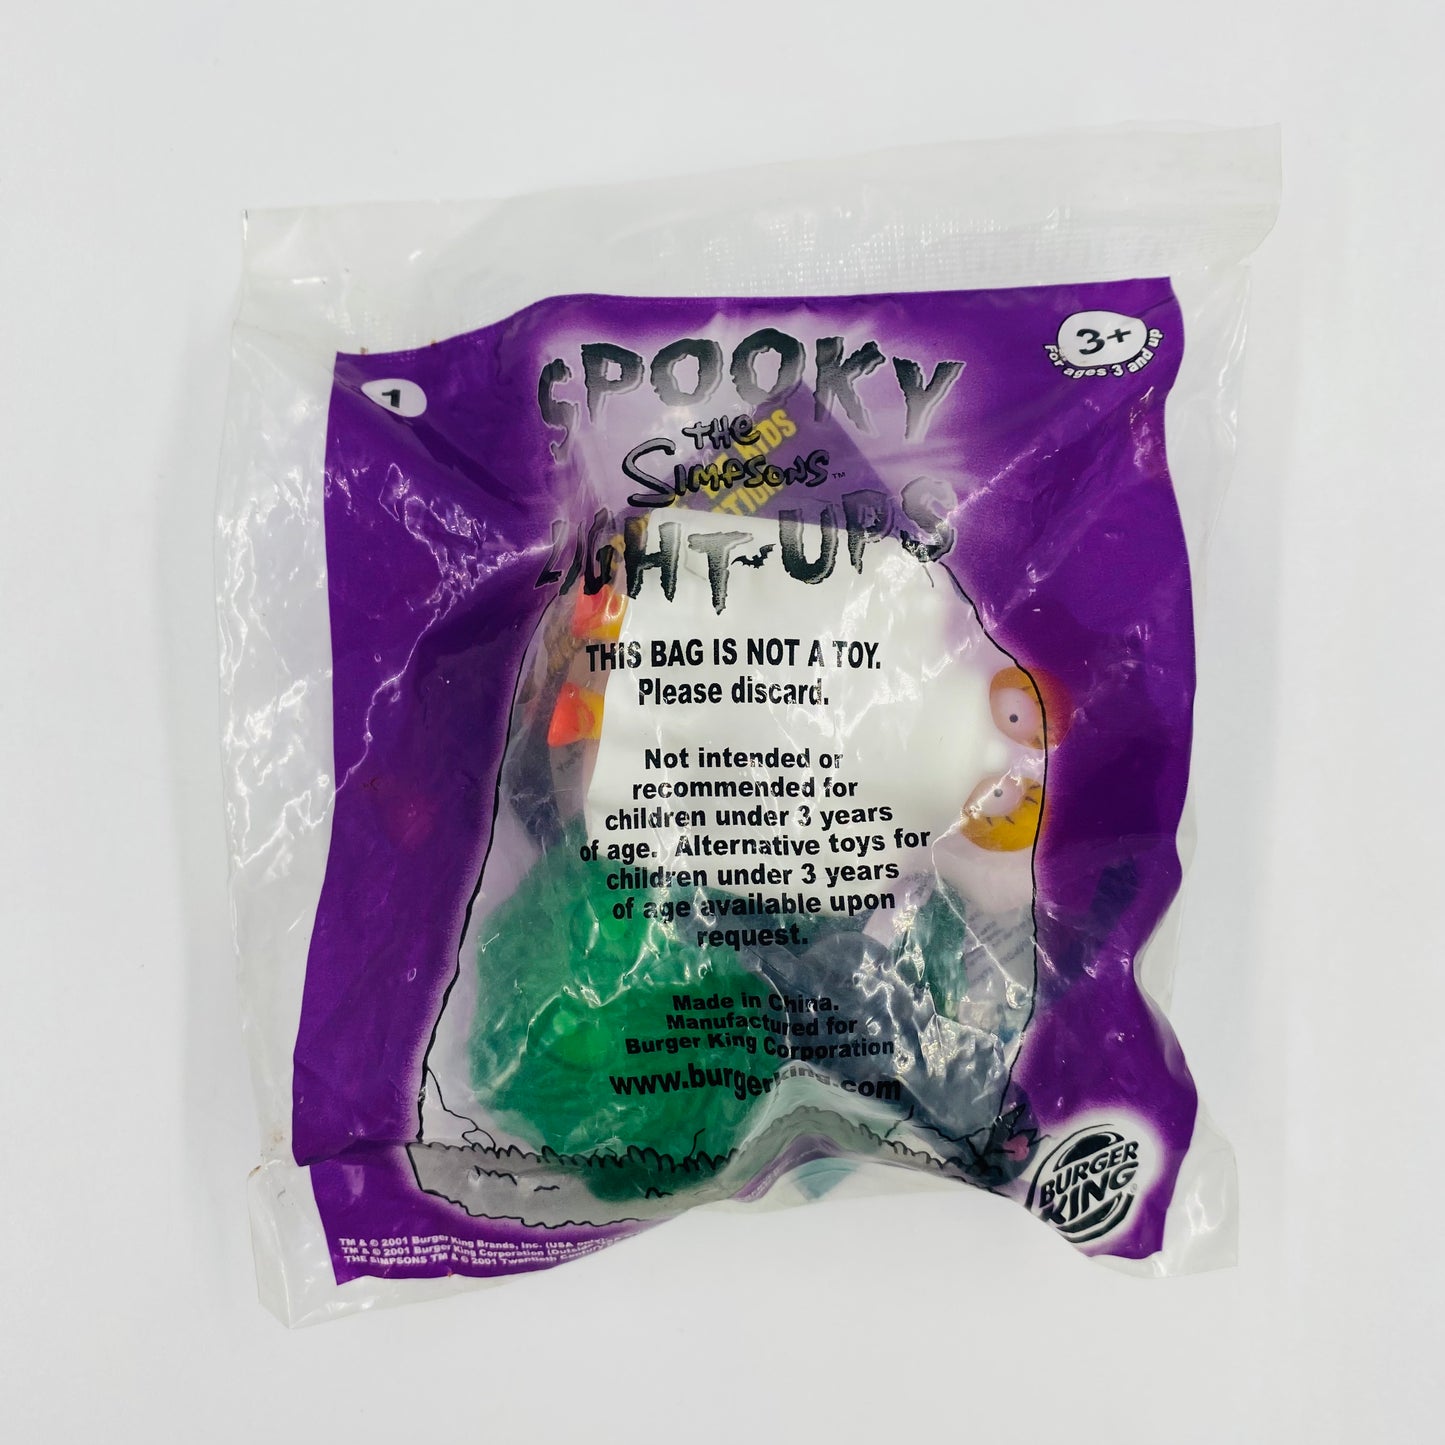 The Simpsons Spooky Light-Ups Lisa Simpson Burger King Kids' Meals toy (2001) bagged